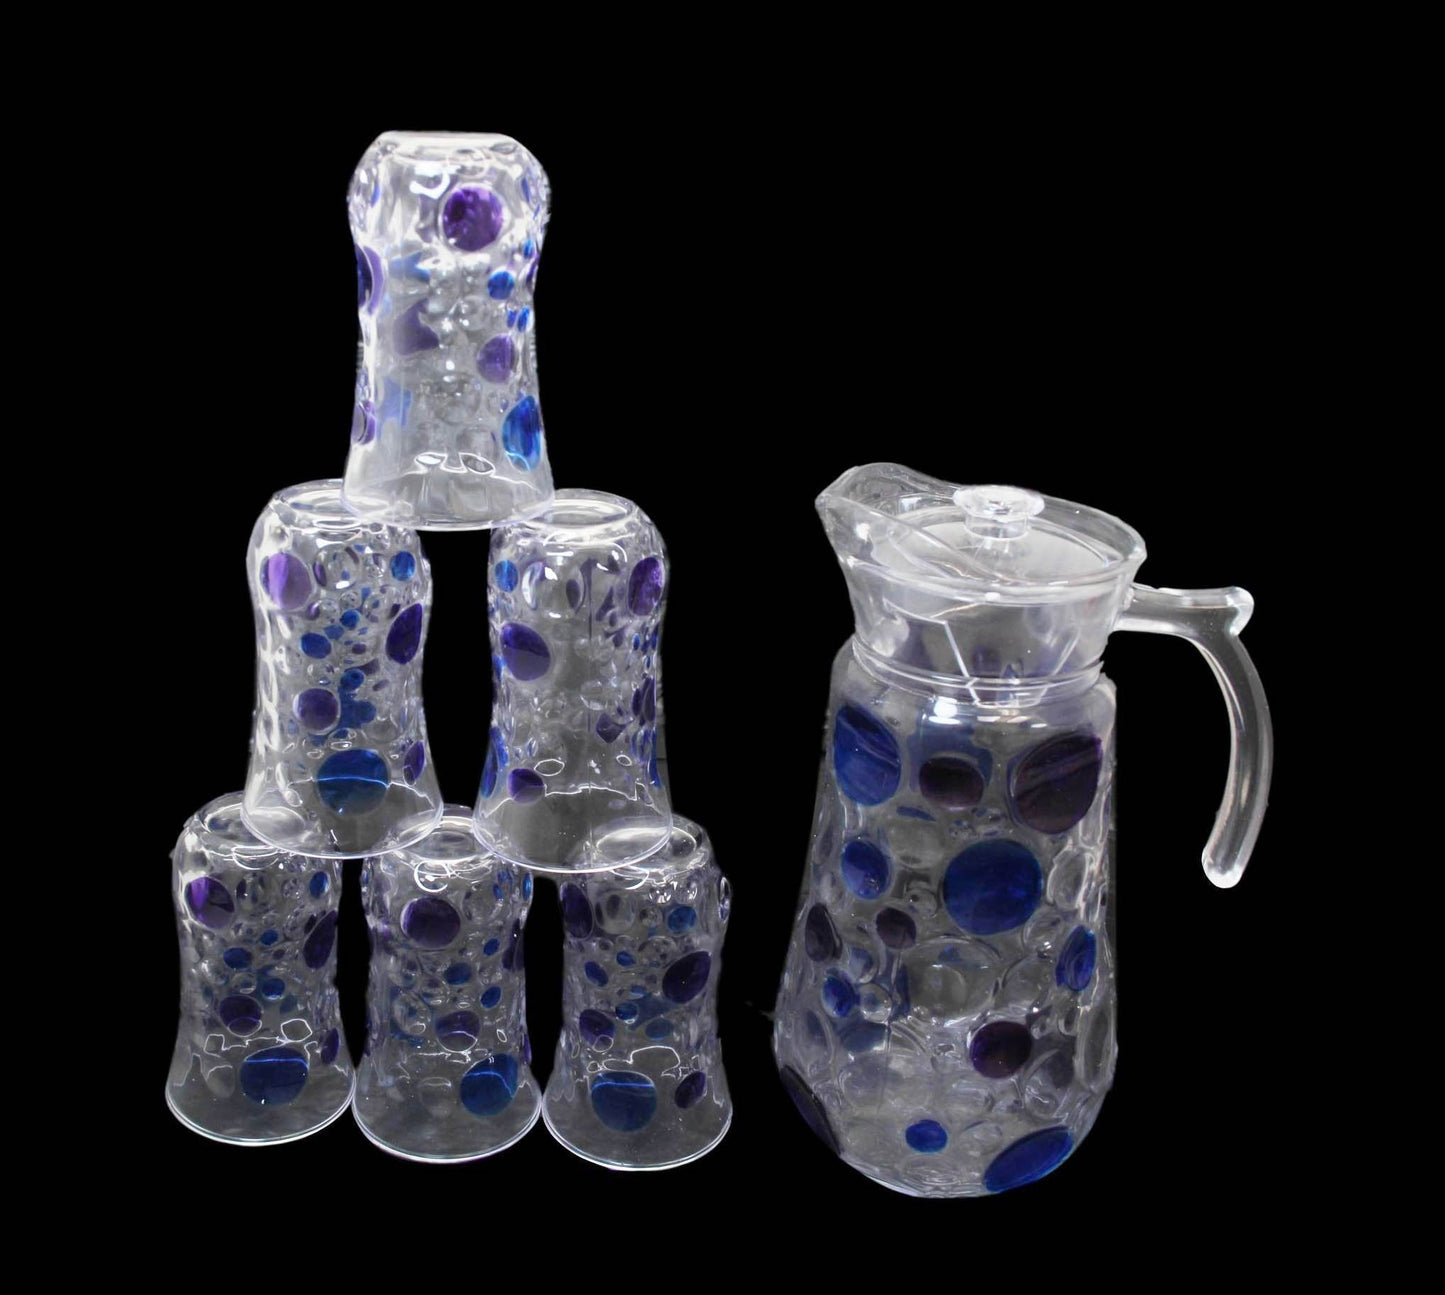 7 Piece Glassware Set Water Jug and 6 Glasses Tumblers Coloured Effect Glass 6334 (Big Parcel Rate)